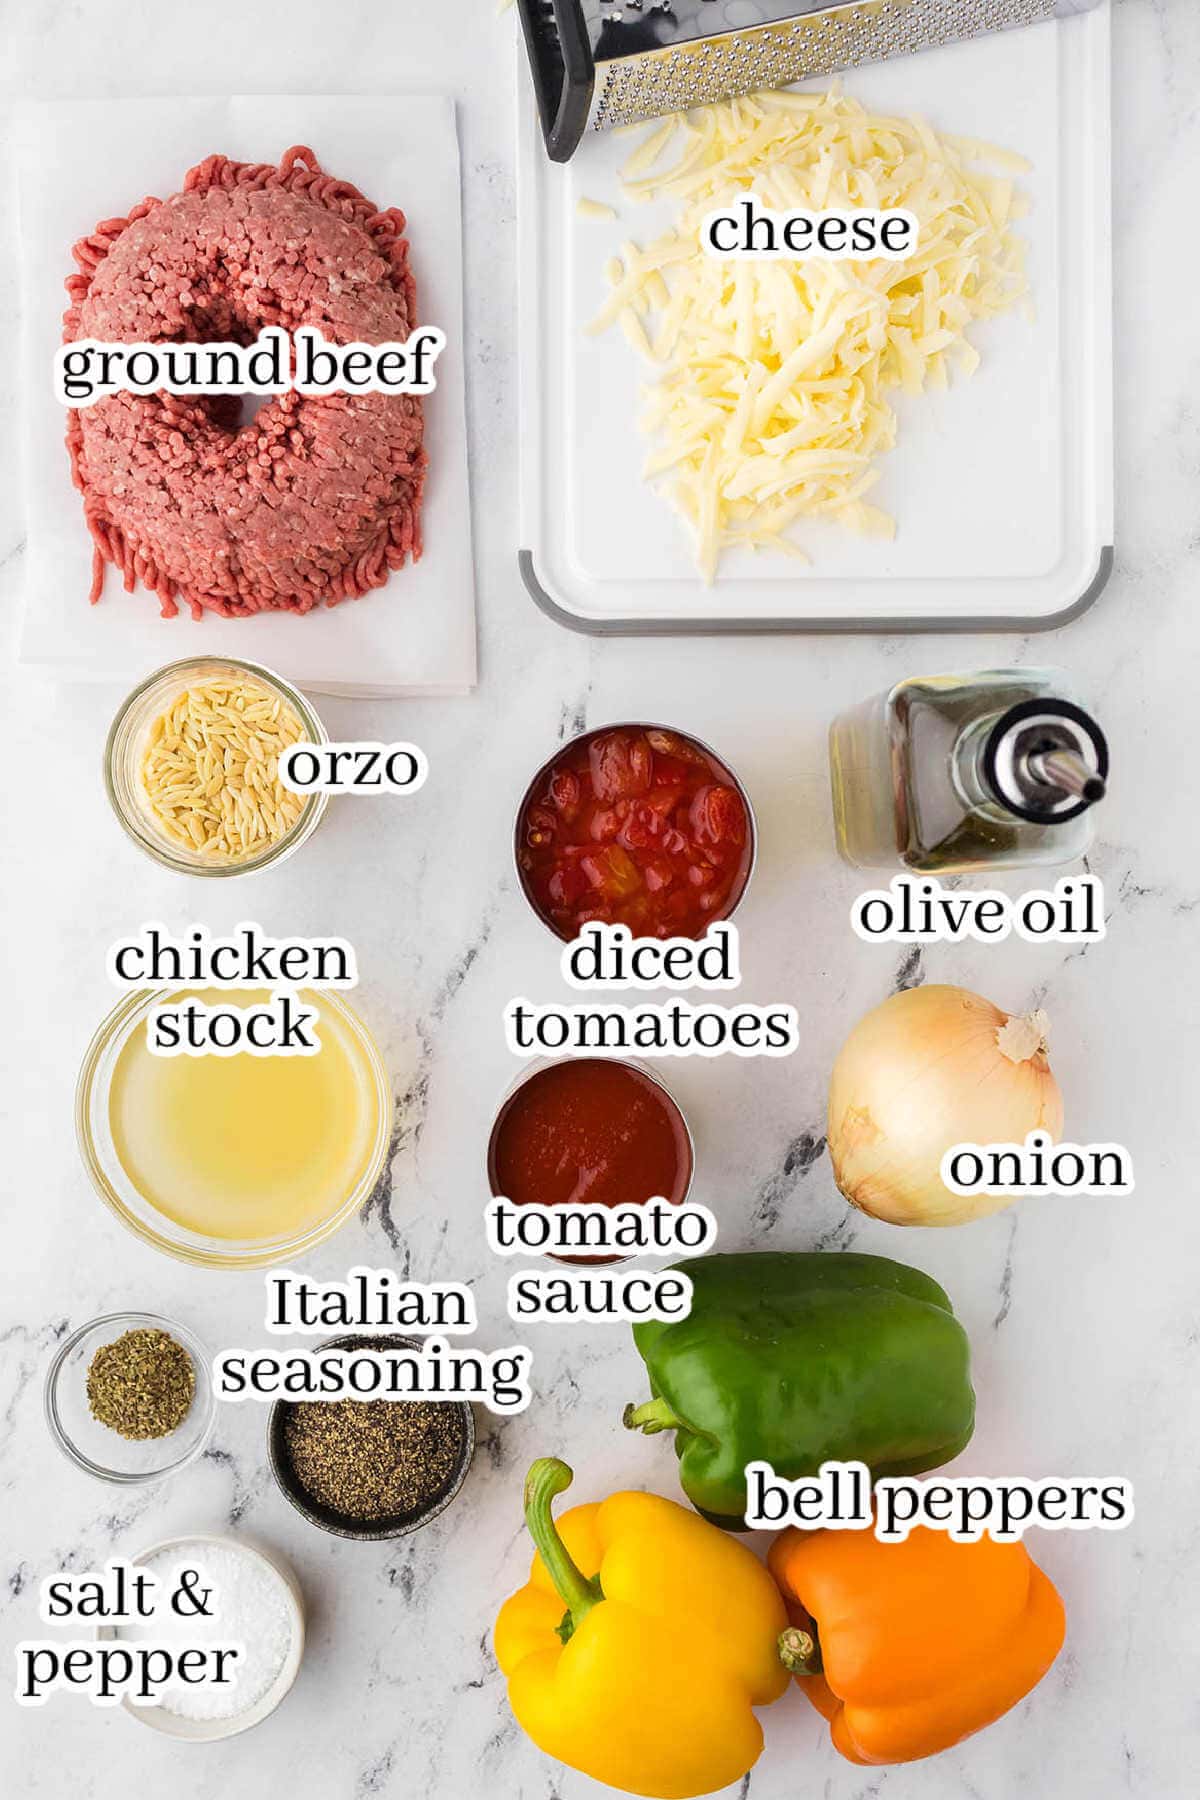 Ingredients to make the stuffed pepper recipe, with print overlay.